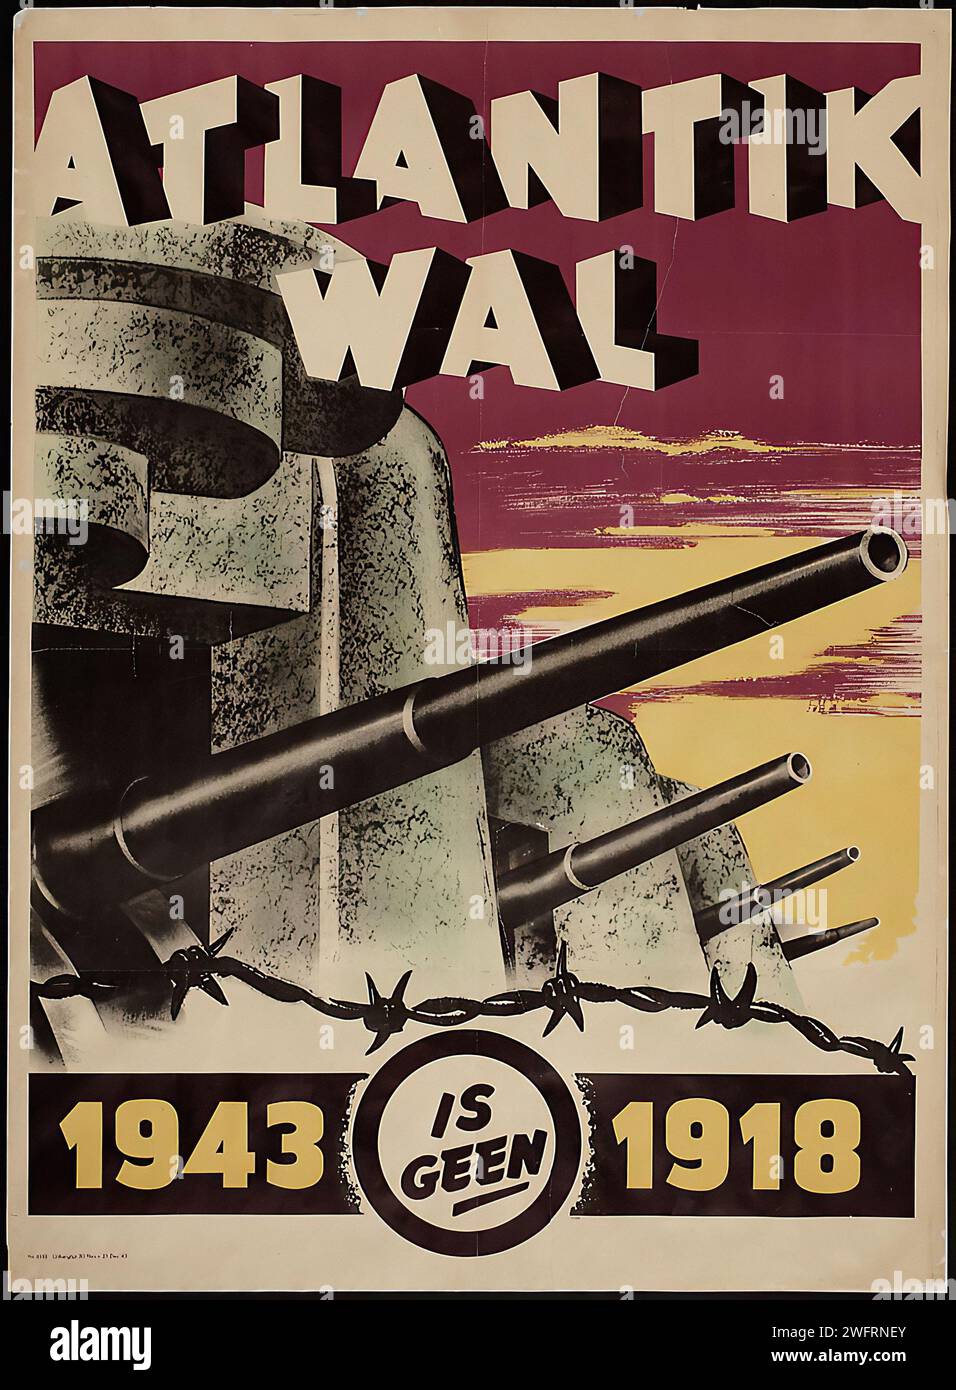 'ATLANTIK WALL 1943 IS GEEN 1918' which translates to 'ATLANTIC WALL 1943 IS NOT 1918' Vintage Dutch Advertising. The image depicts a fortified coastline with cannons, using stark contrasts and a dramatic sky to evoke the strength of the Atlantic Wall defenses. The poster has a propagandistic and bold wartime aesthetic. Stock Photo